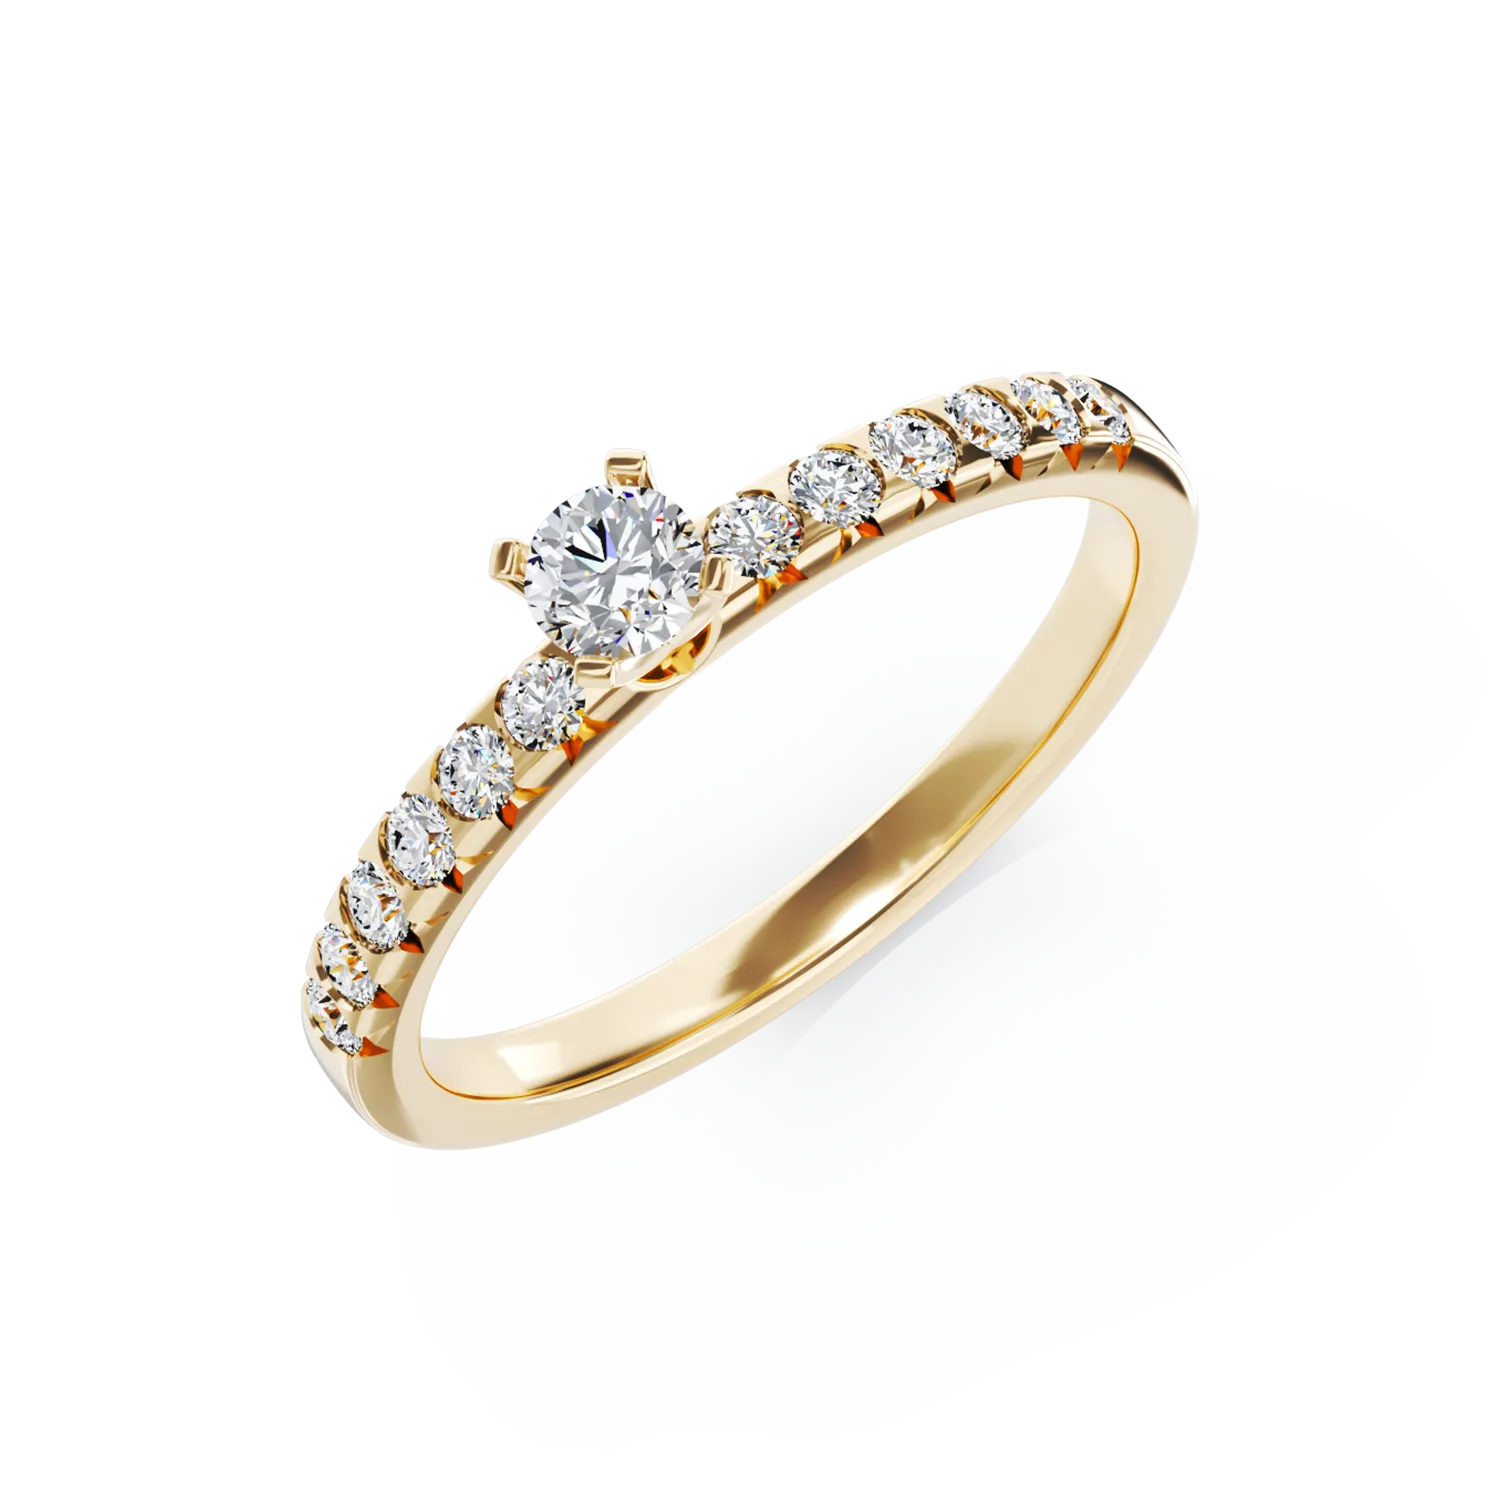 18K yellow gold engagement ring with 0.15ct diamond and 0.28ct diamonds